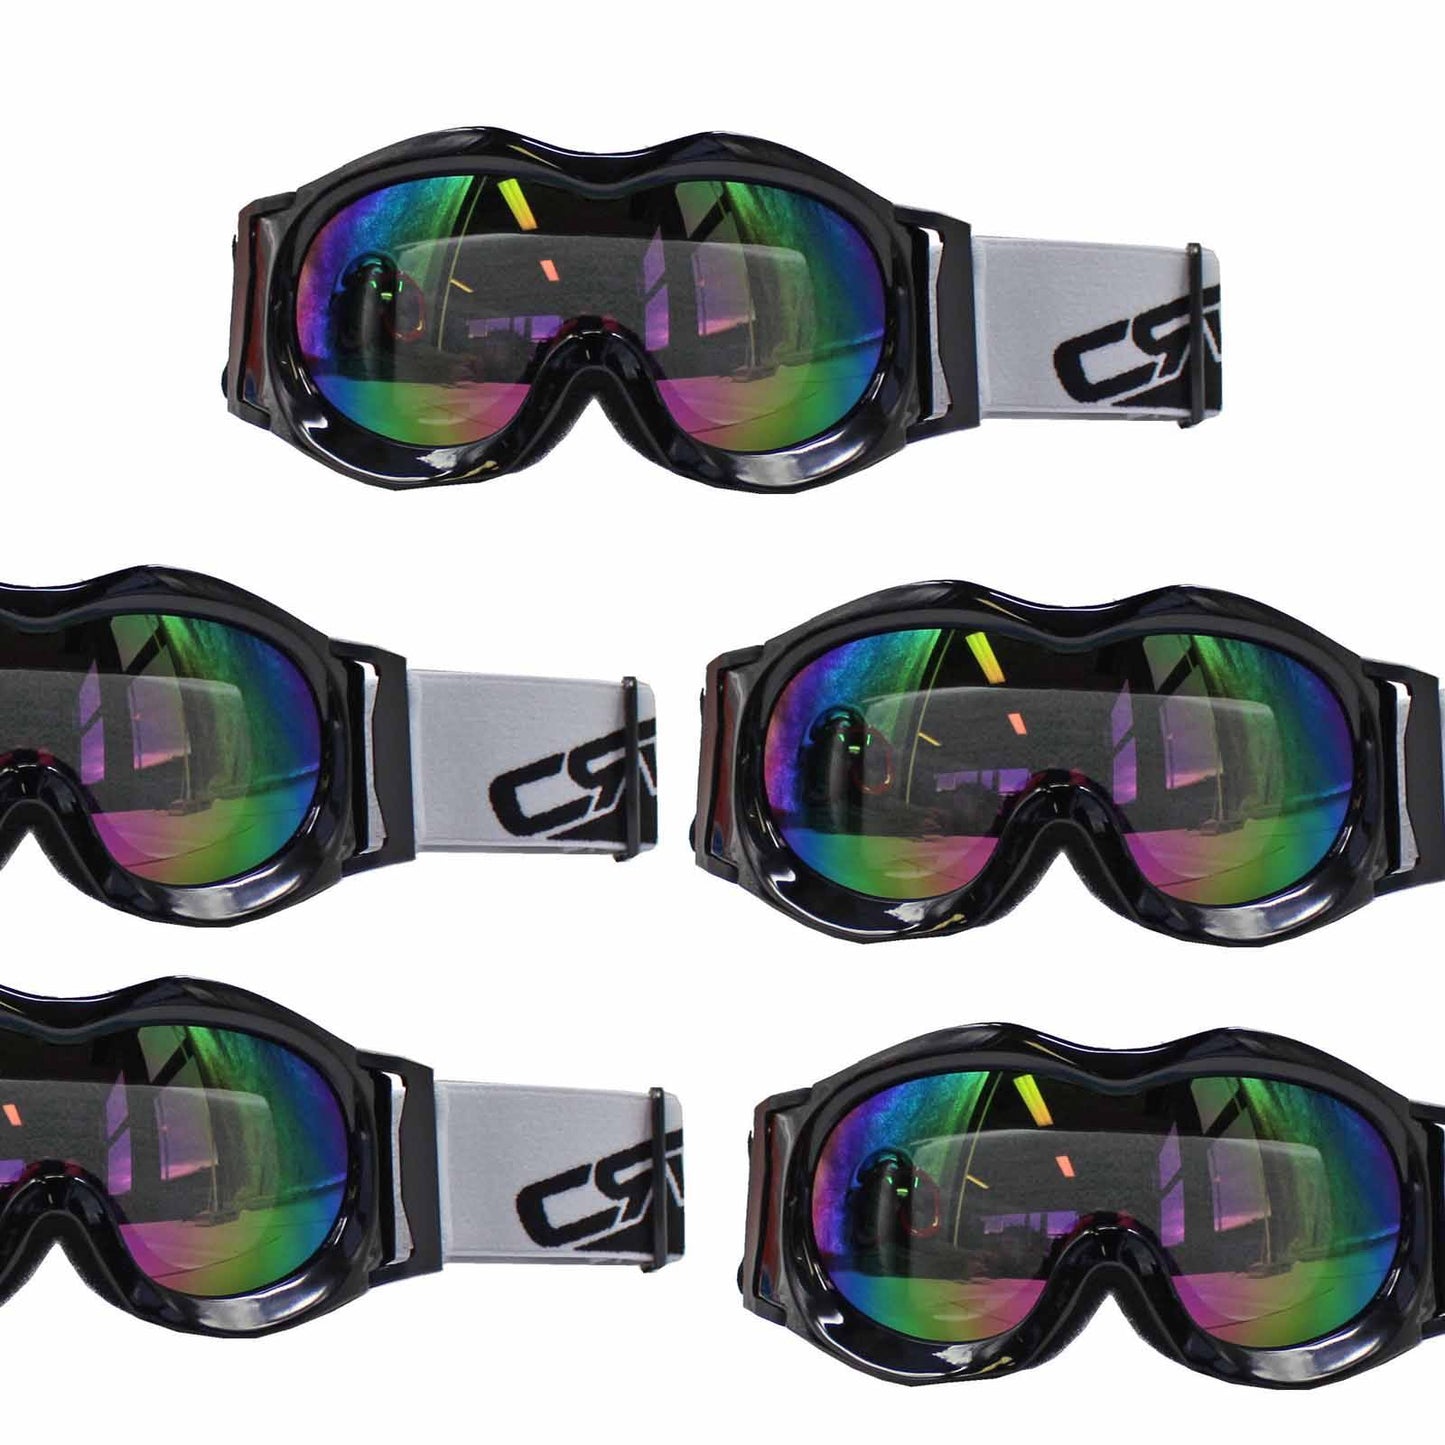 Kids Black Goggles Tinted Lens For Outdoor Motor Sports Cycling Skiing Skateboarding - TDRMOTO